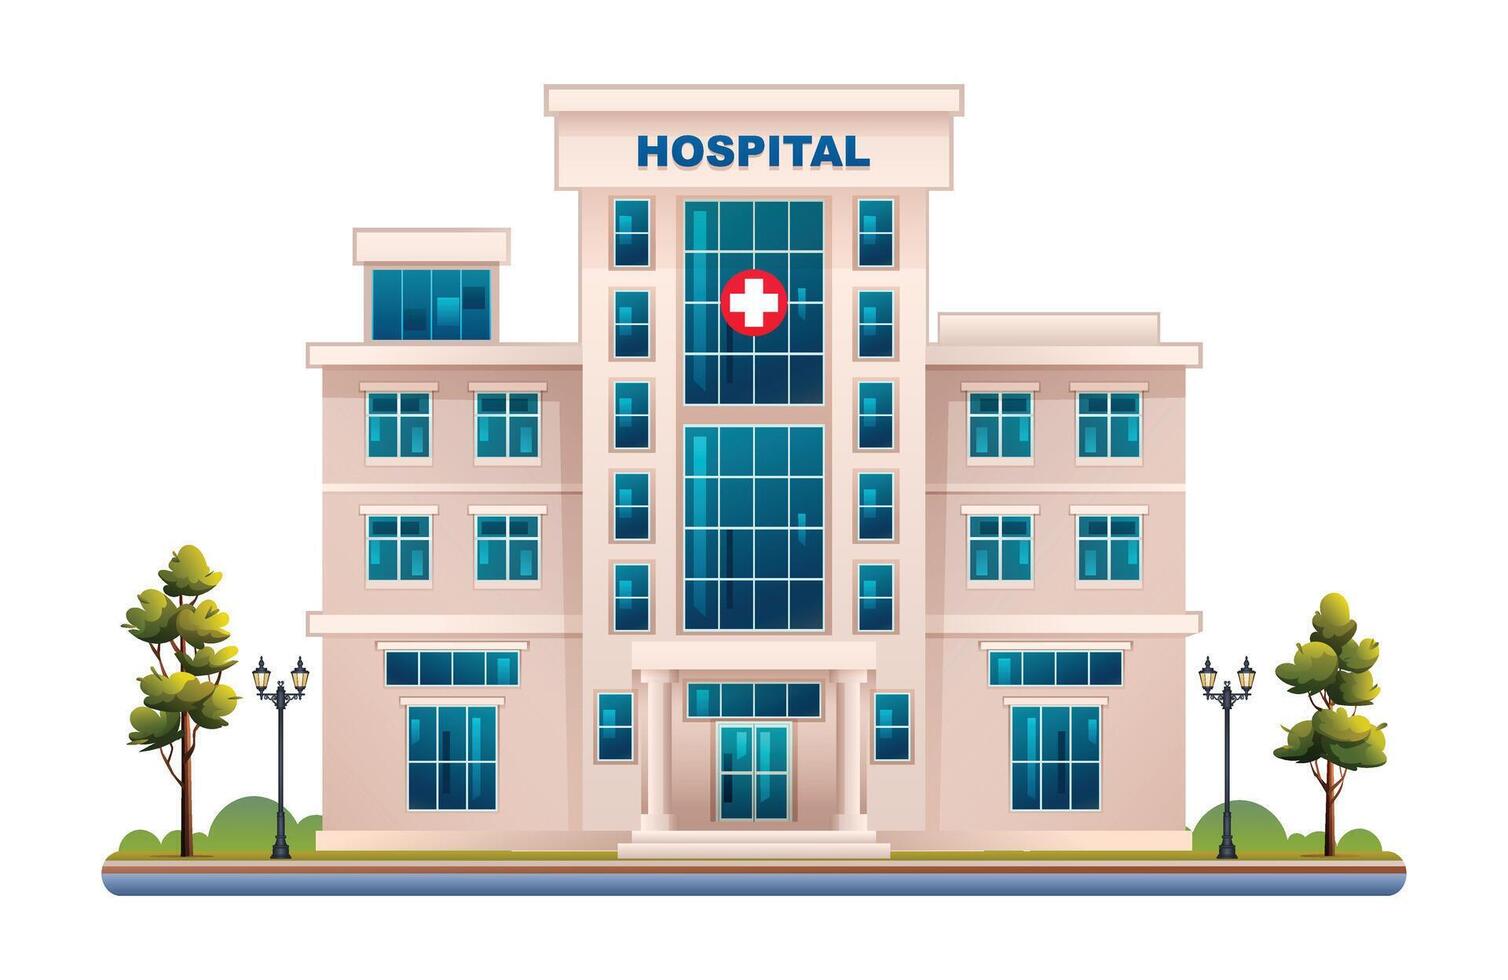 Public hospital building illustration. Medical clinic vector isolated on white background